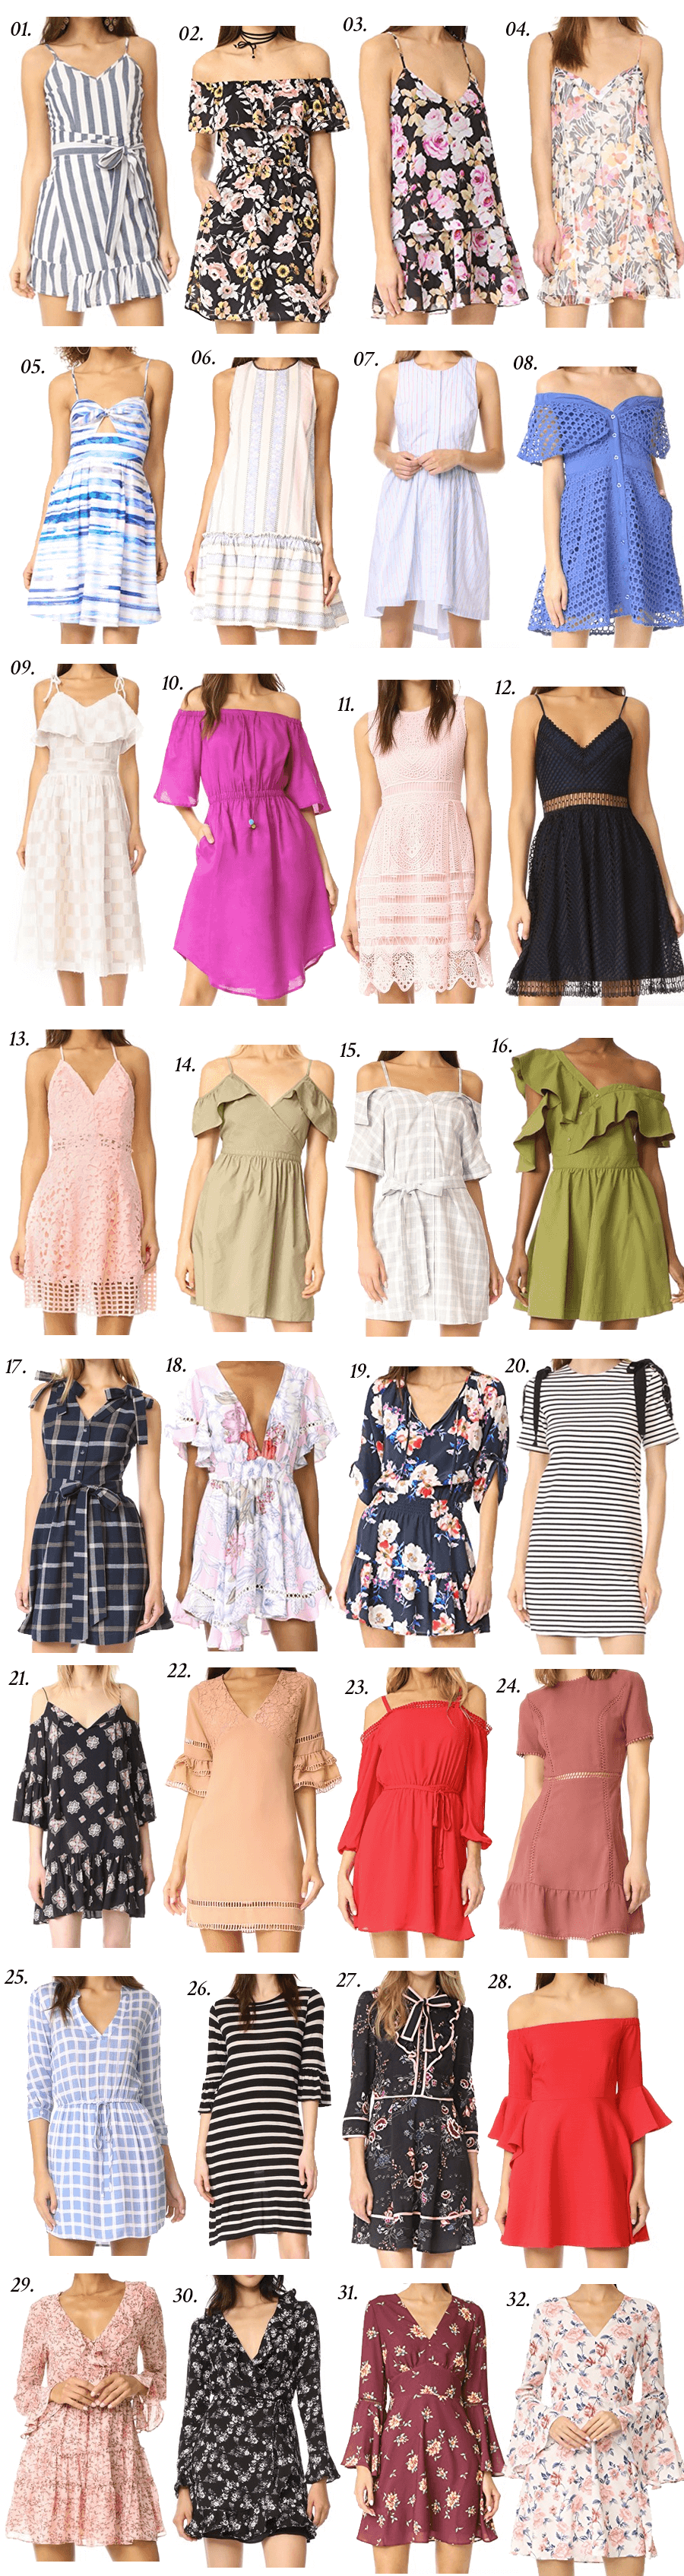 Wish List Wednesday, Shopping Guide, Dresses